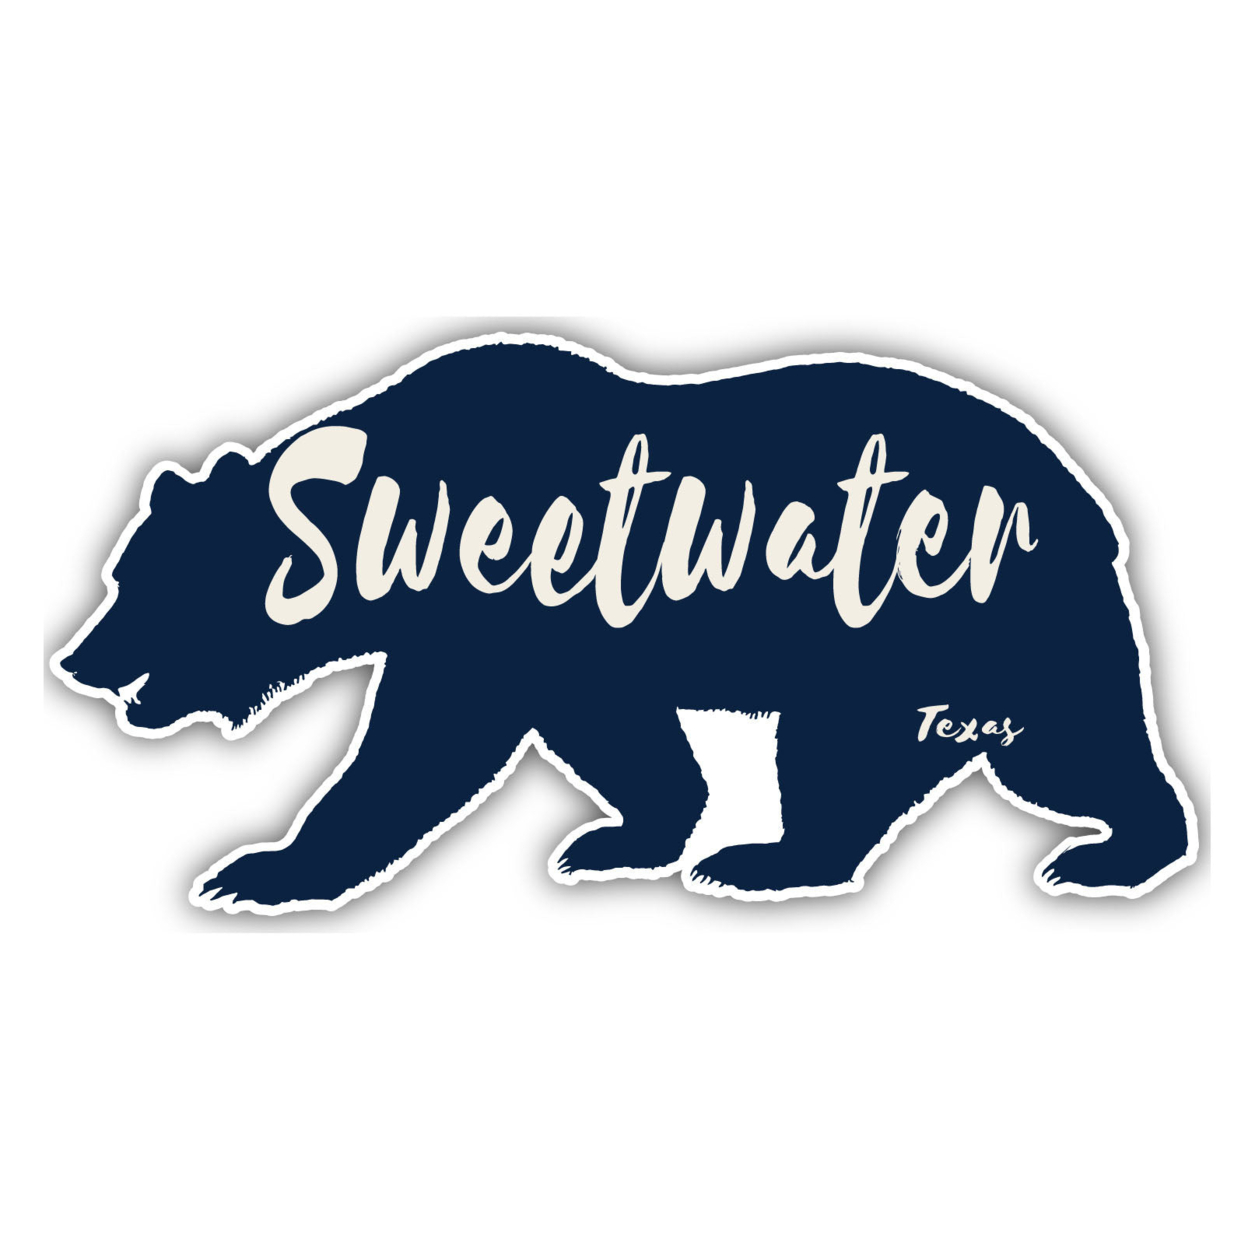 Sweetwater Texas Souvenir Decorative Stickers (Choose Theme And Size) - Single Unit, 4-Inch, Tent